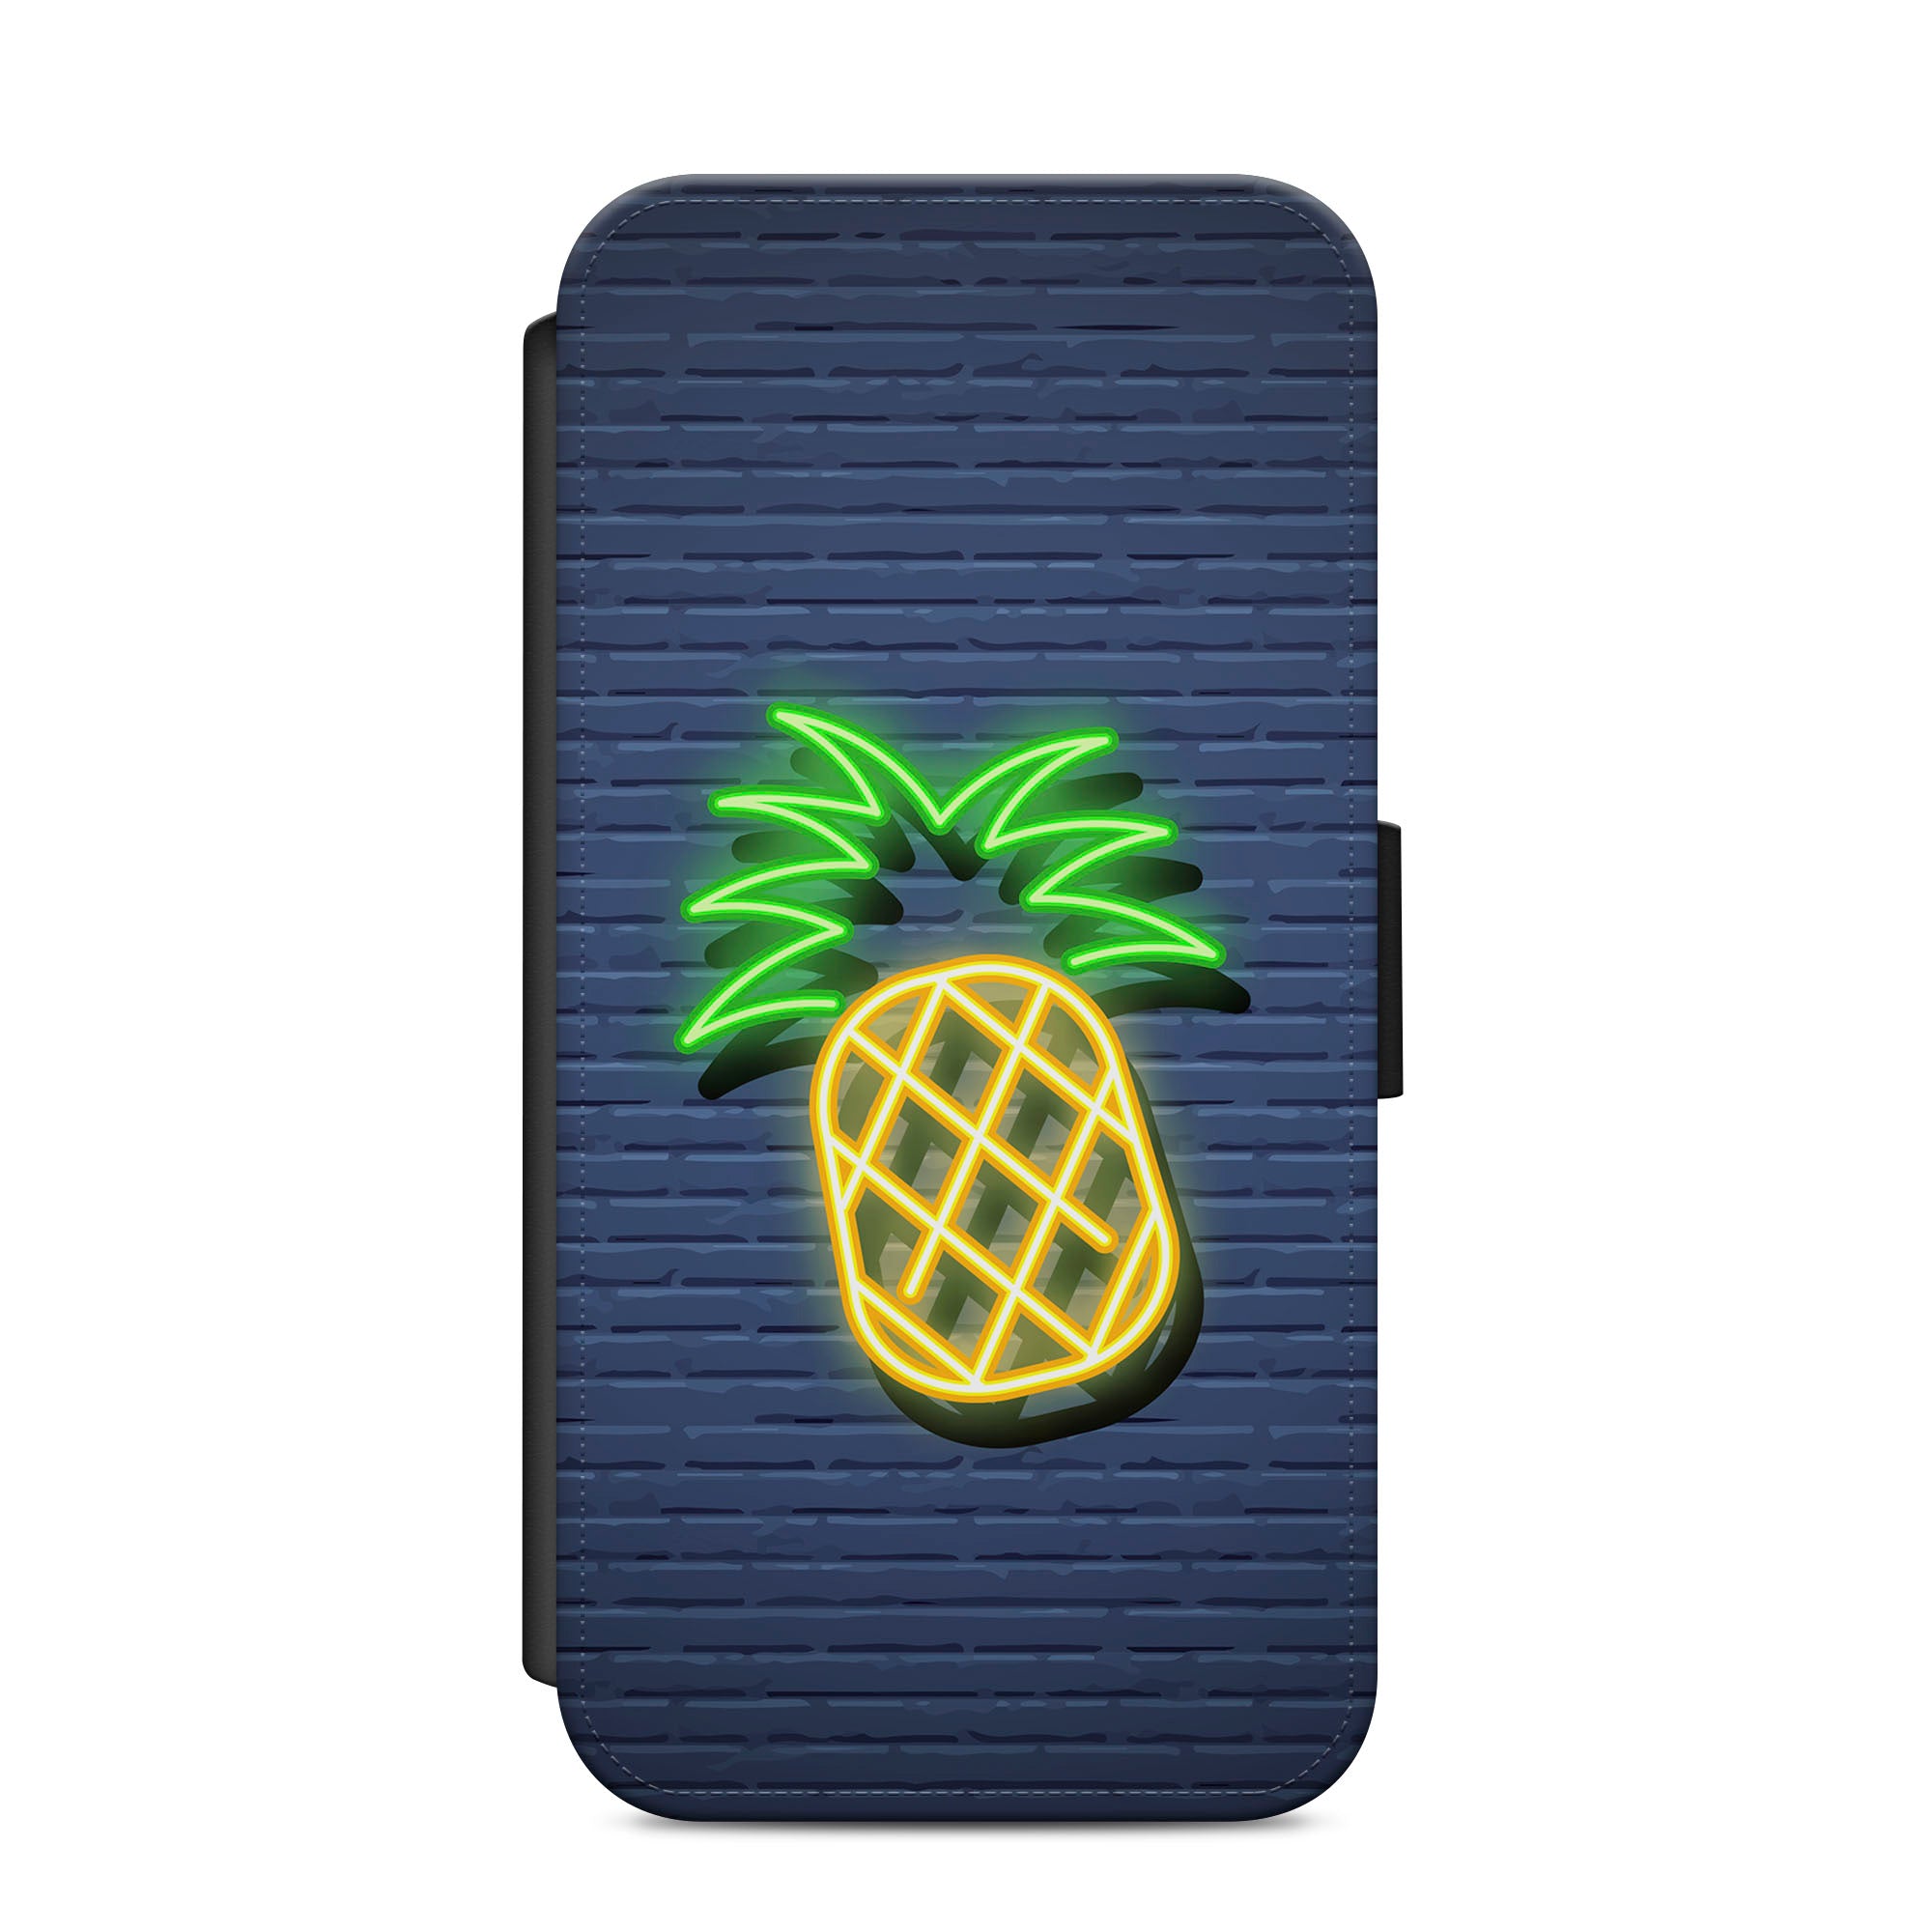 Neon Pineapple Faux Leather Flip Case Wallet for iPhone / Samsung